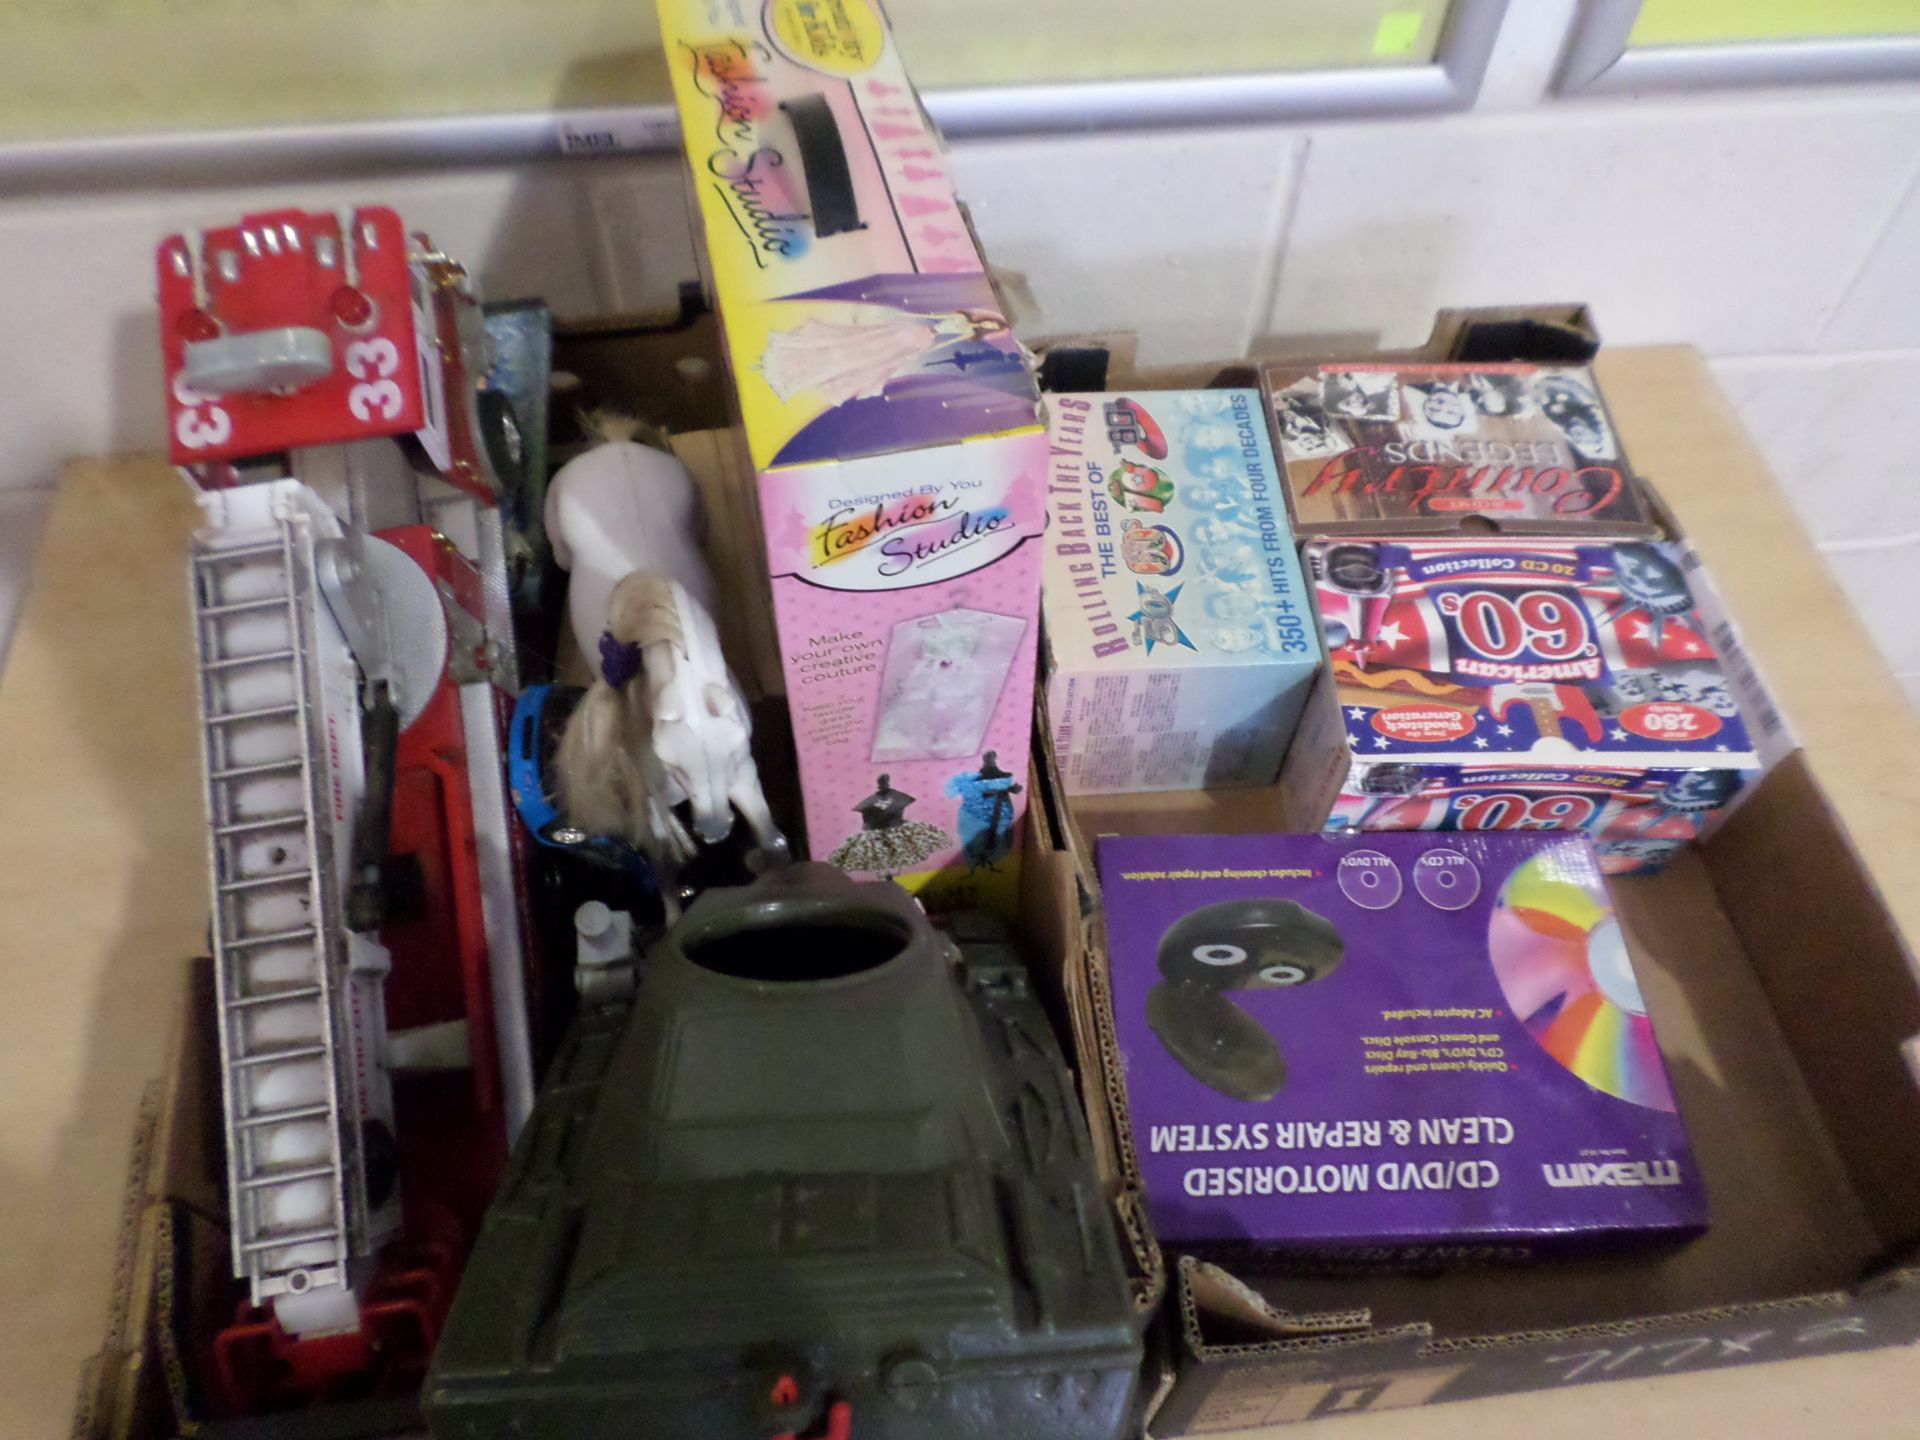 2 boxes of toy horses, assorted toys and children's books etc